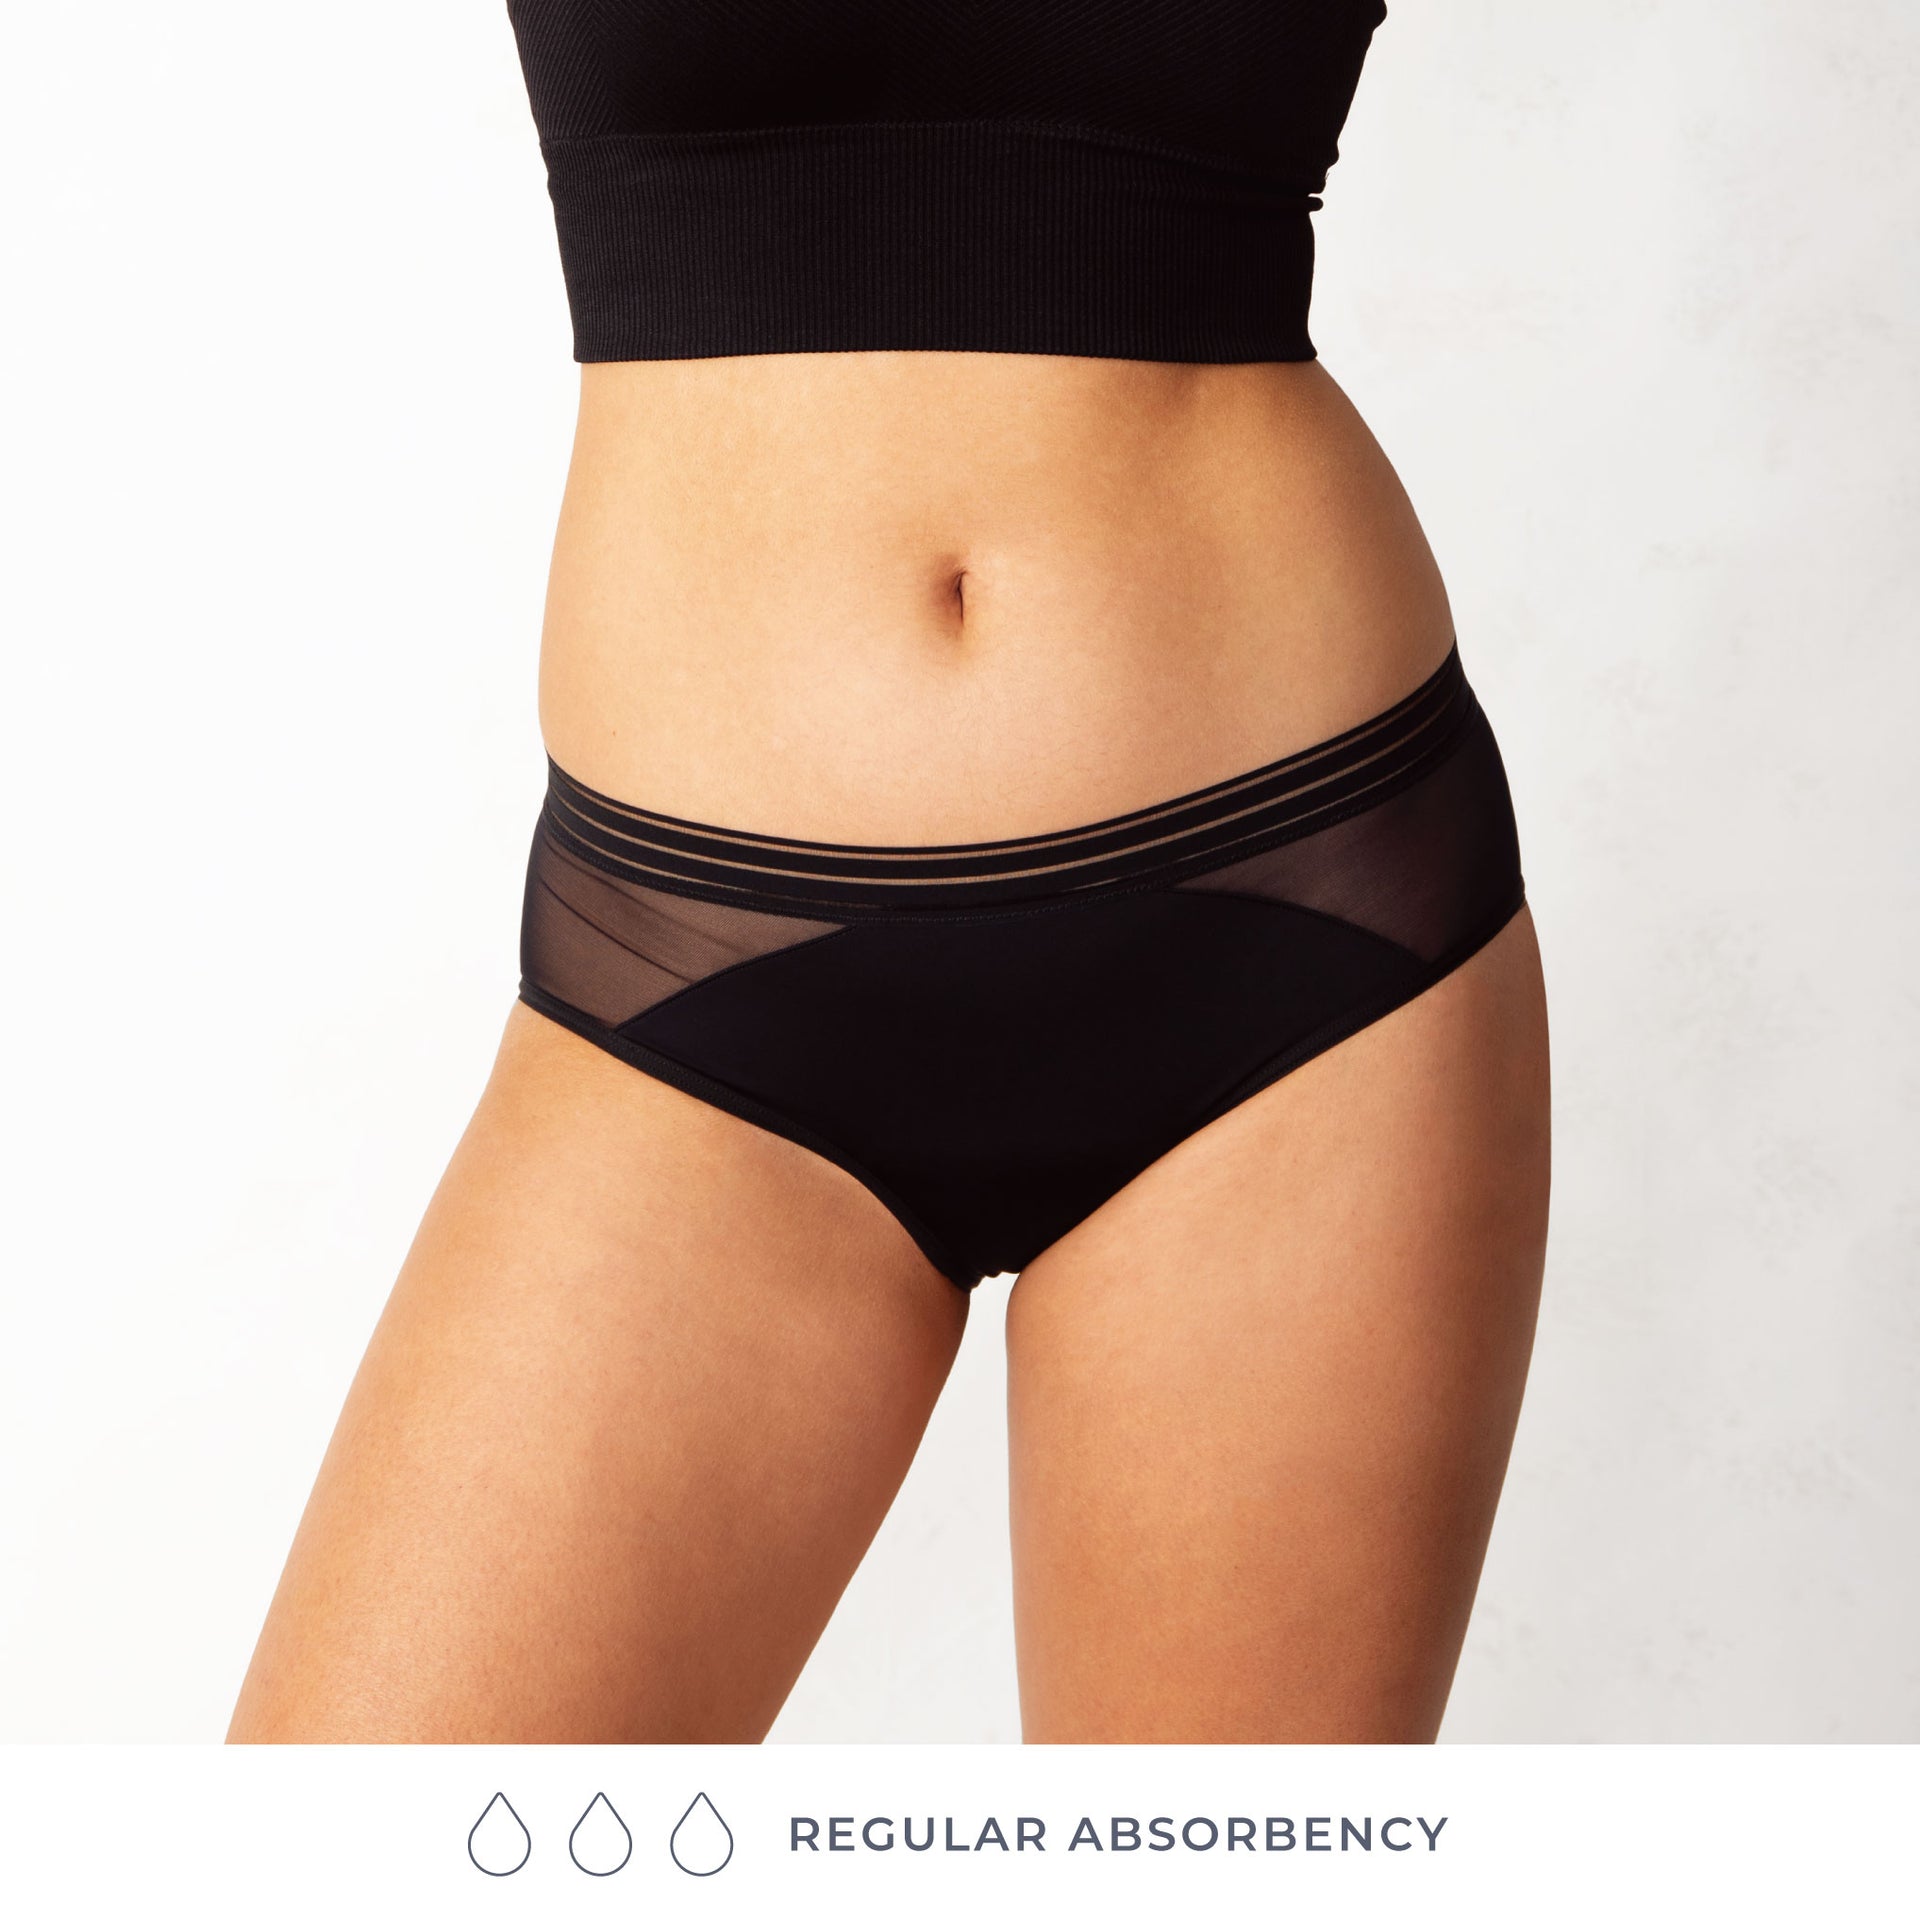 saalt Reusable Period Underwear - Comfortable, Thin, and Keeps You